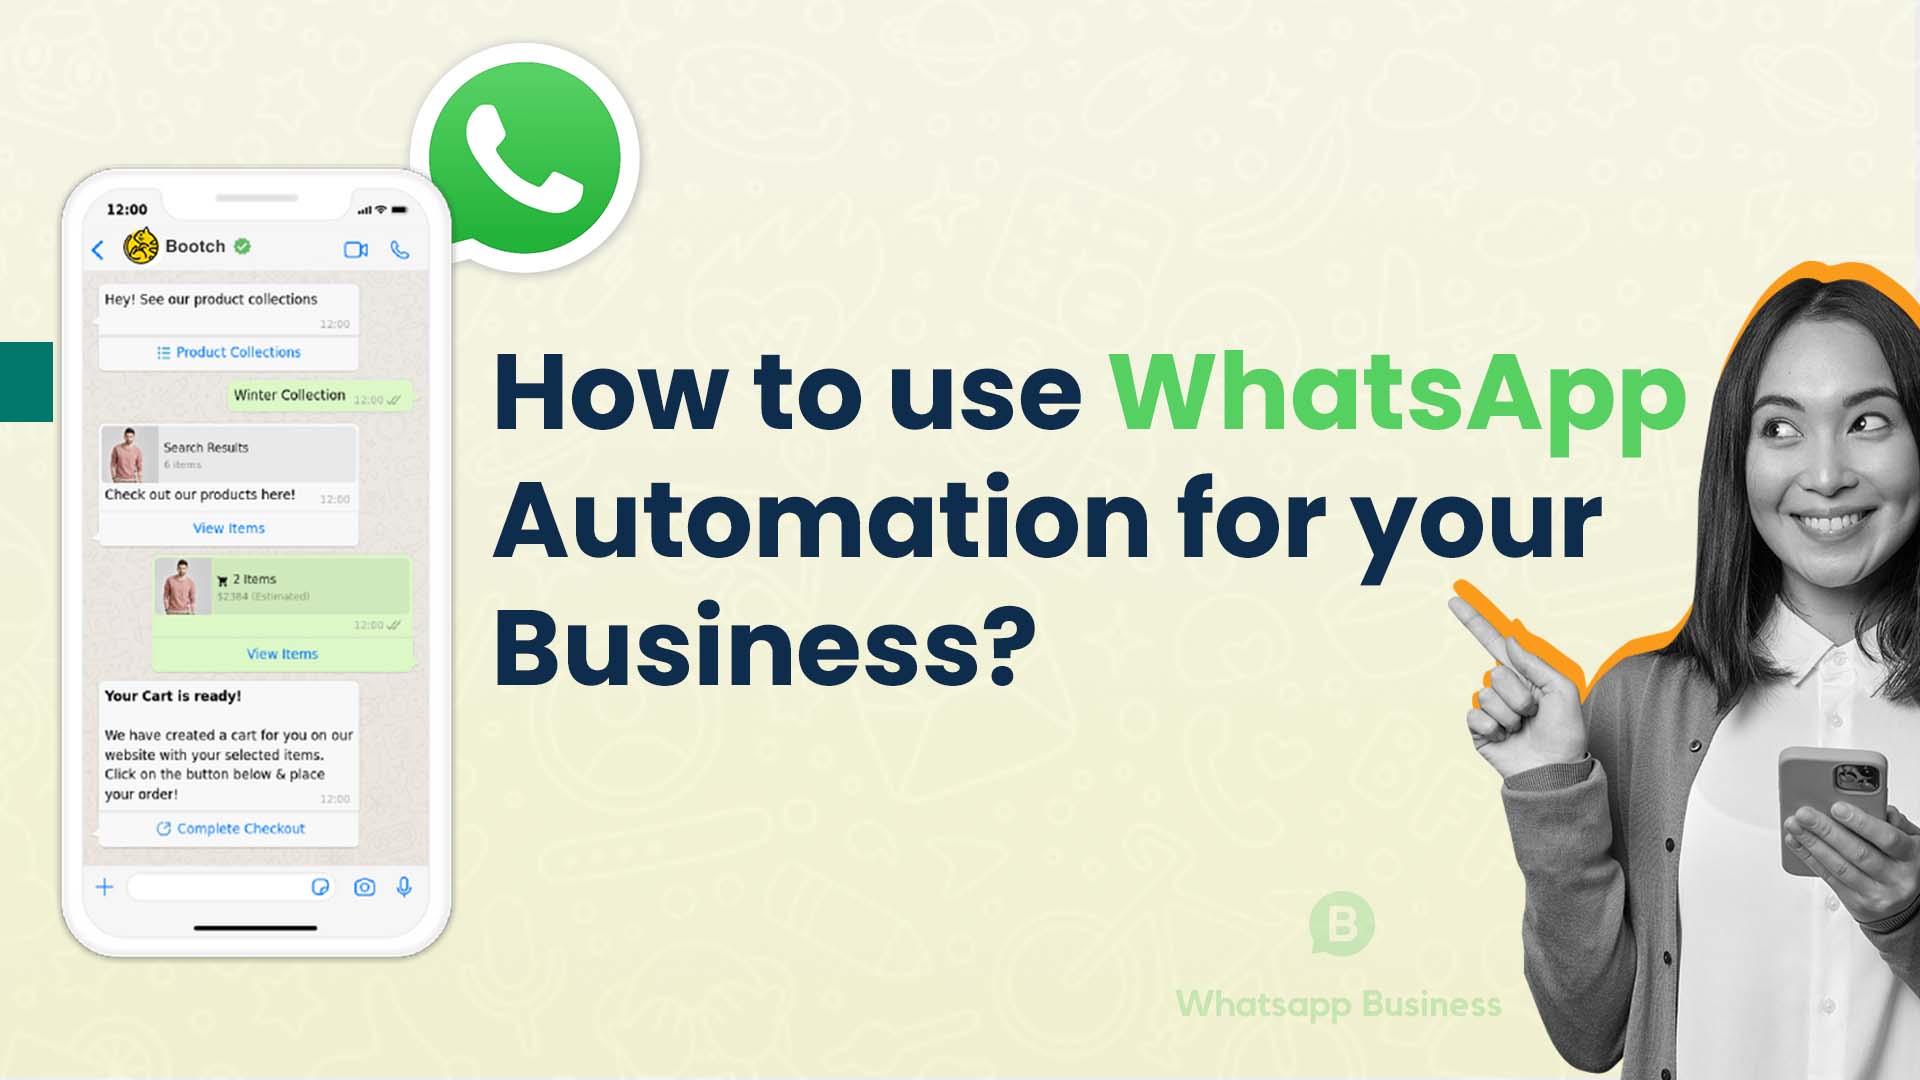 How to Use WhatsApp Automation for your Business